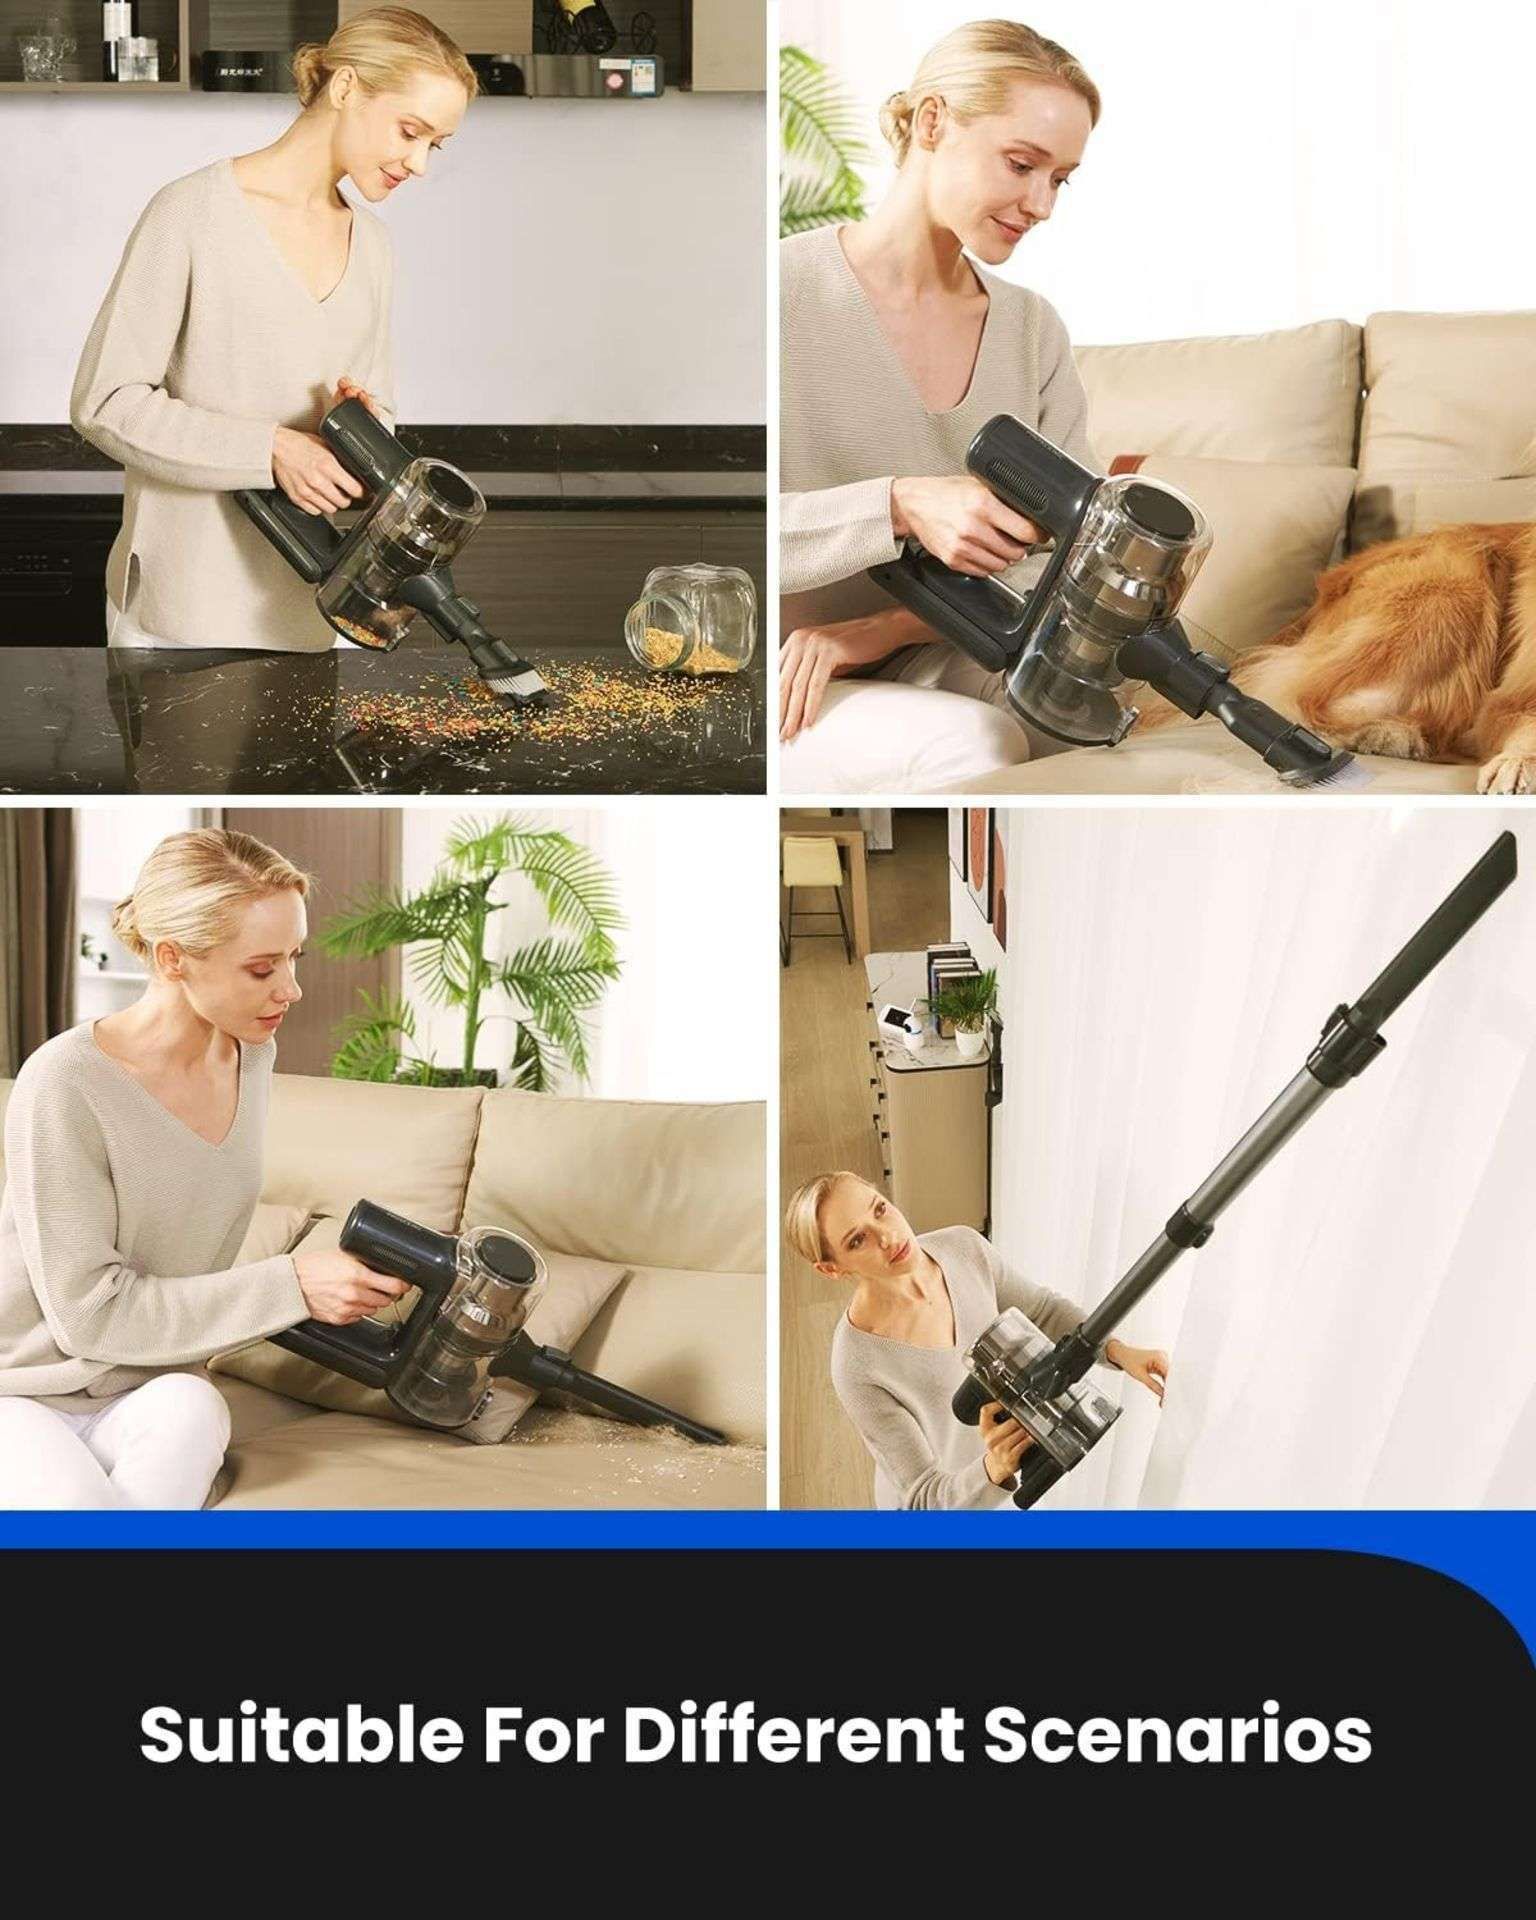 New & Boxed Proscenic P12 Cordless Vacuum Cleaner, 33Kpa Stick Vacuum Cleaner with Touch Display, - Image 5 of 9